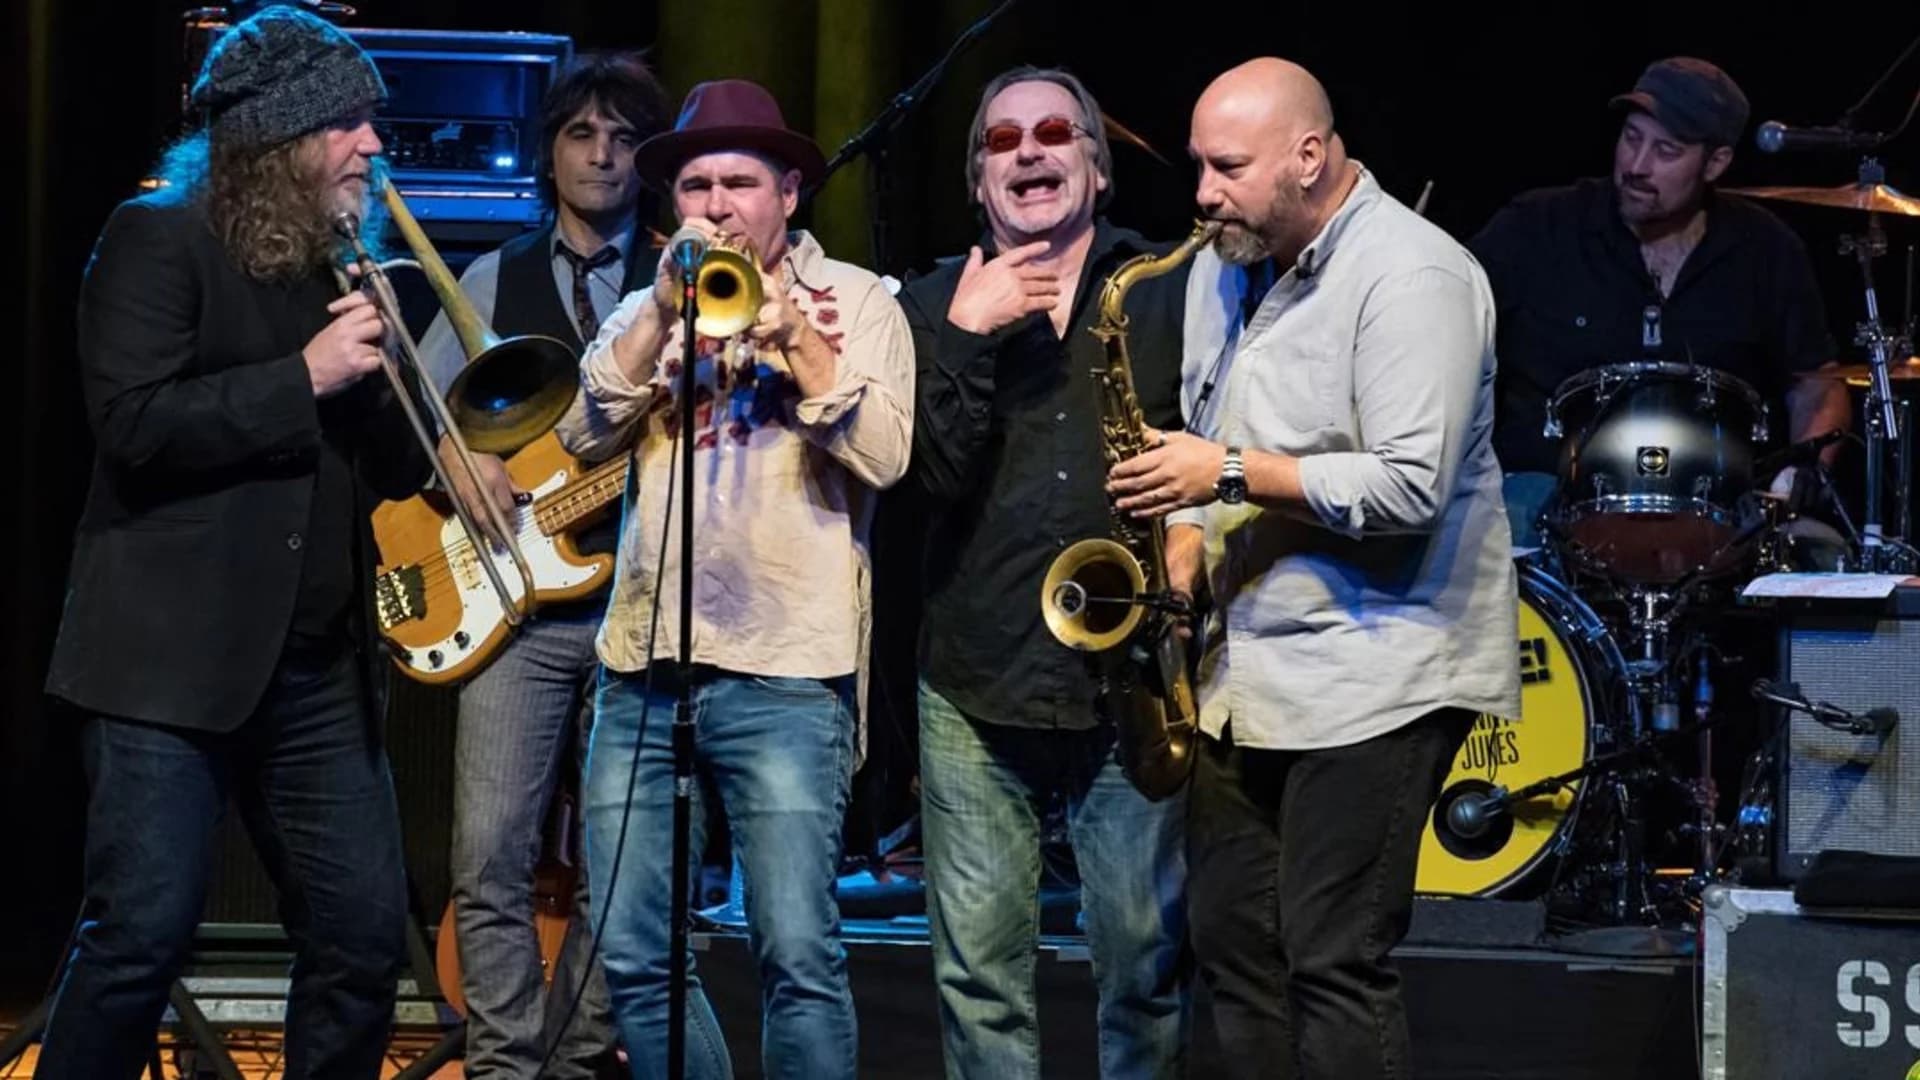 PHOTOS: Southside Johnny and the Asbury Jukes at The Paramount